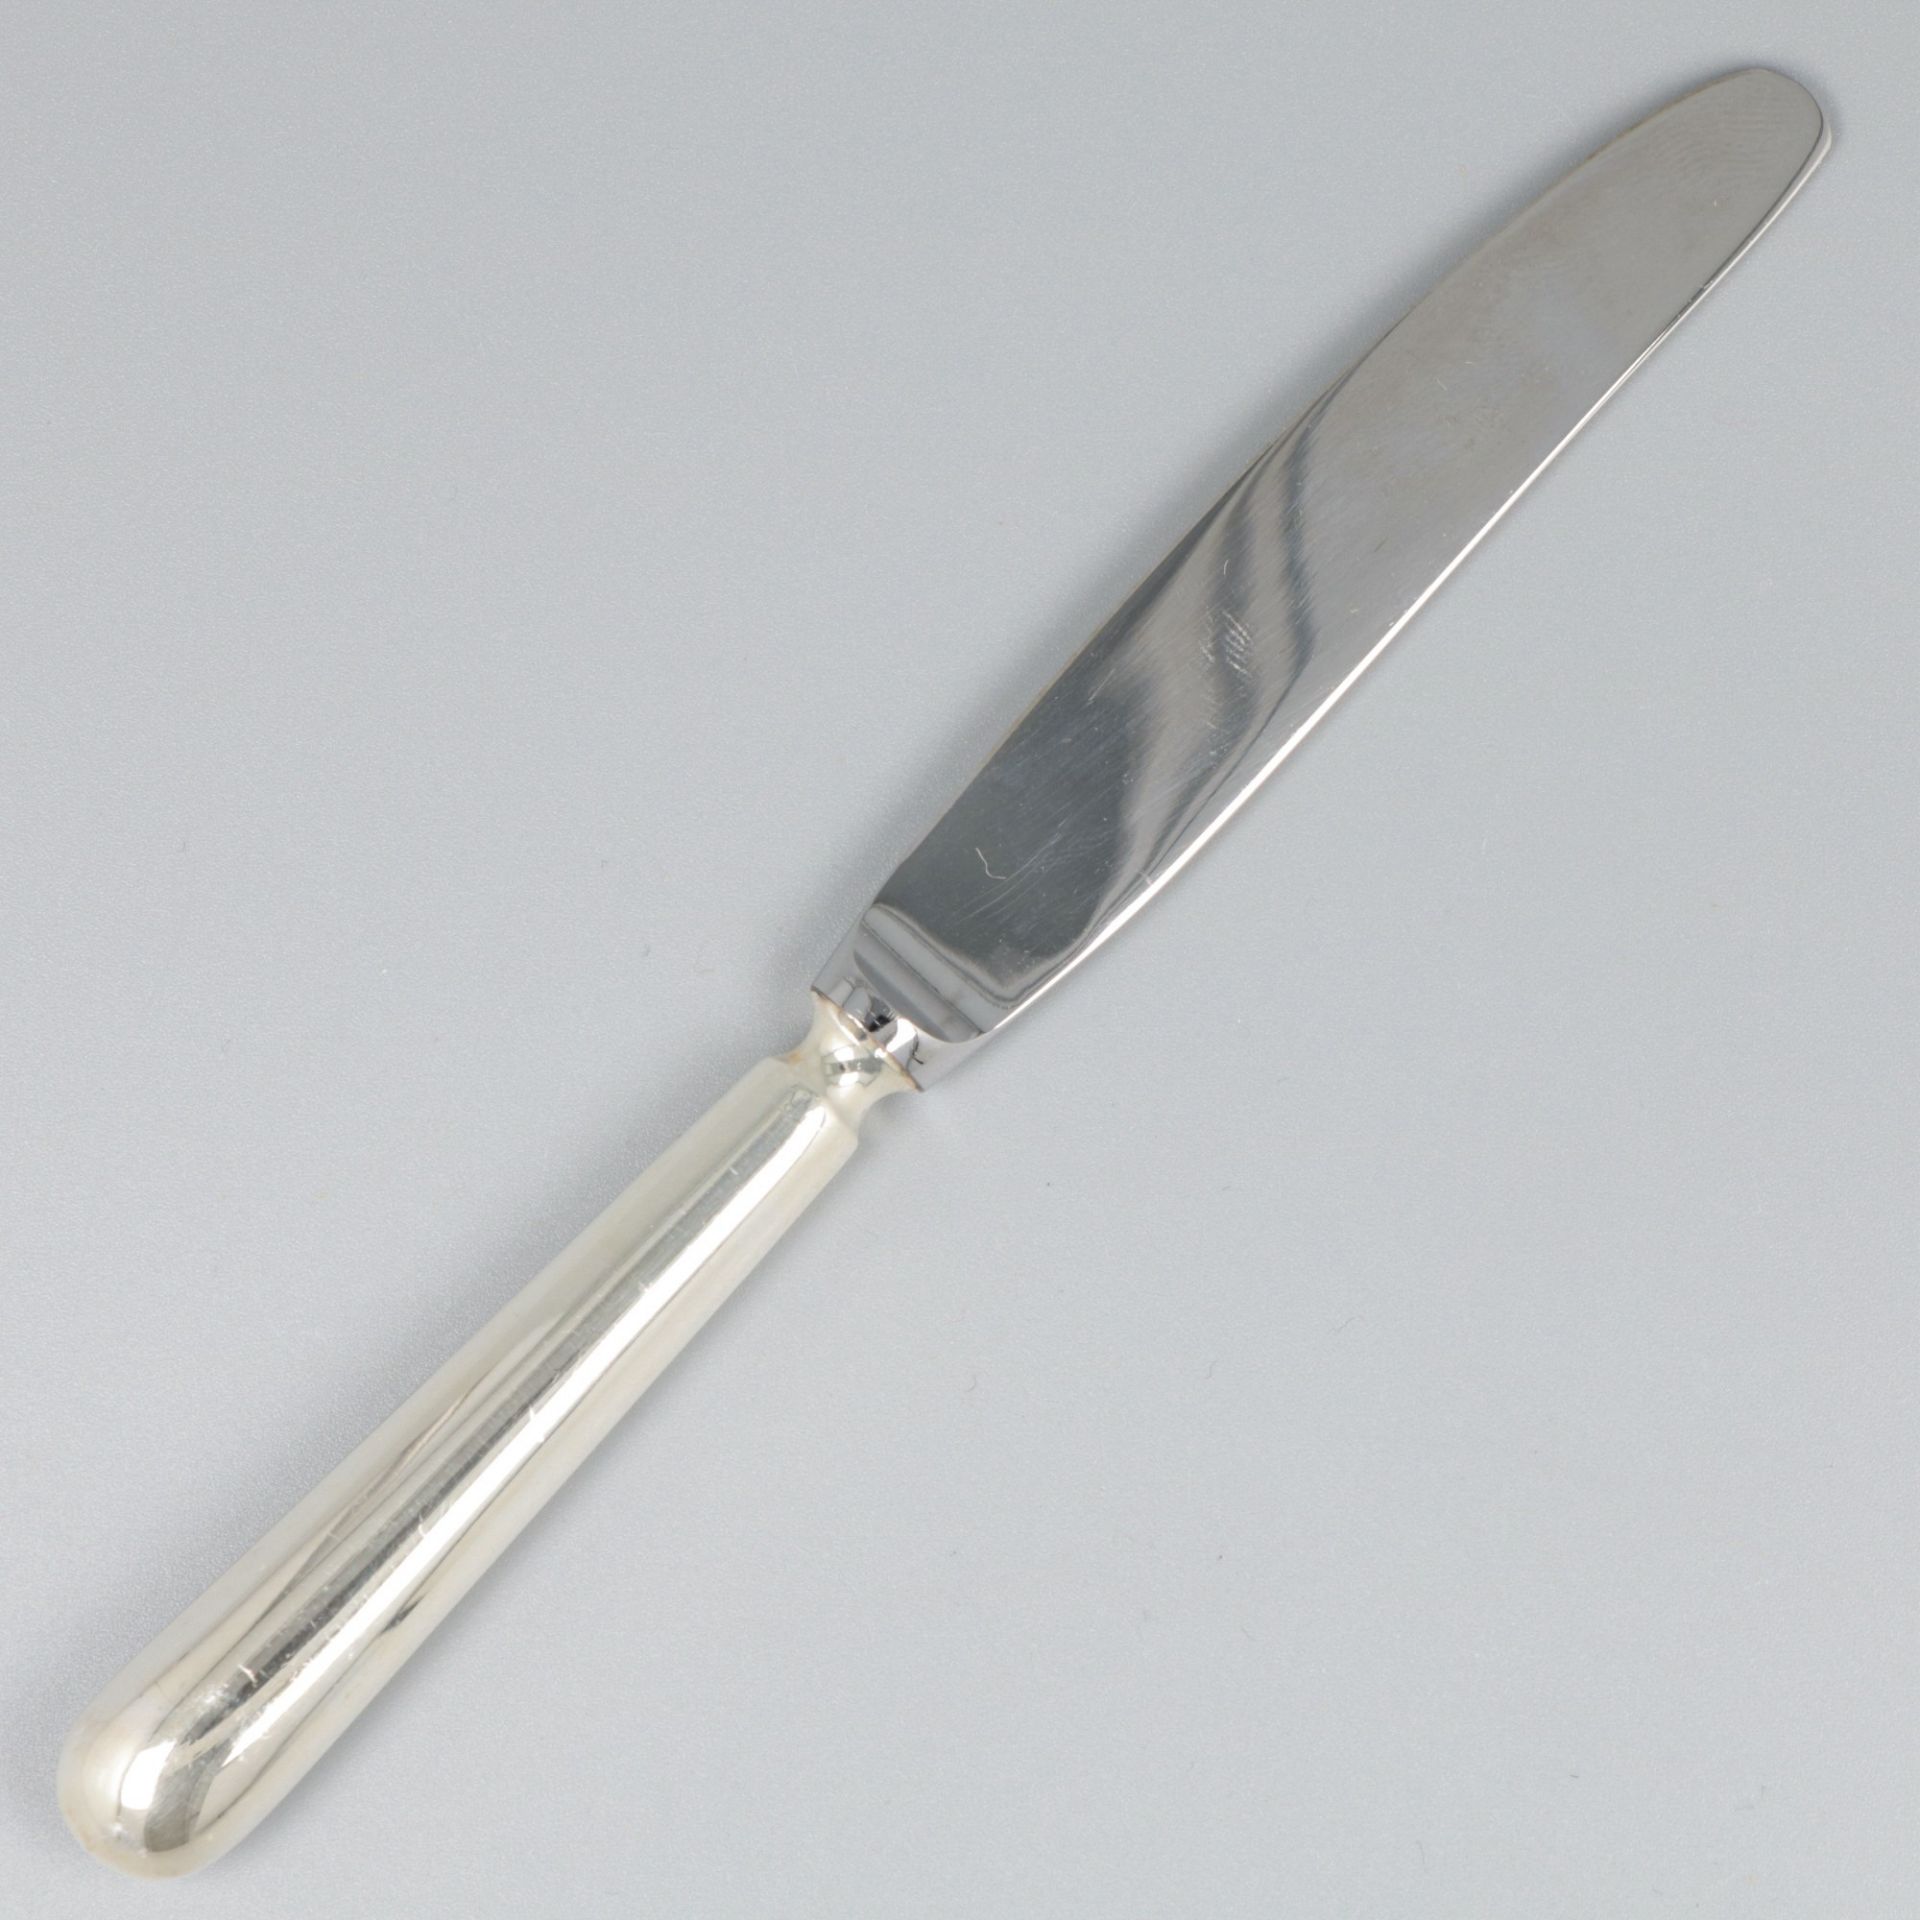 6-piece set of fruit knives silver. - Image 5 of 9